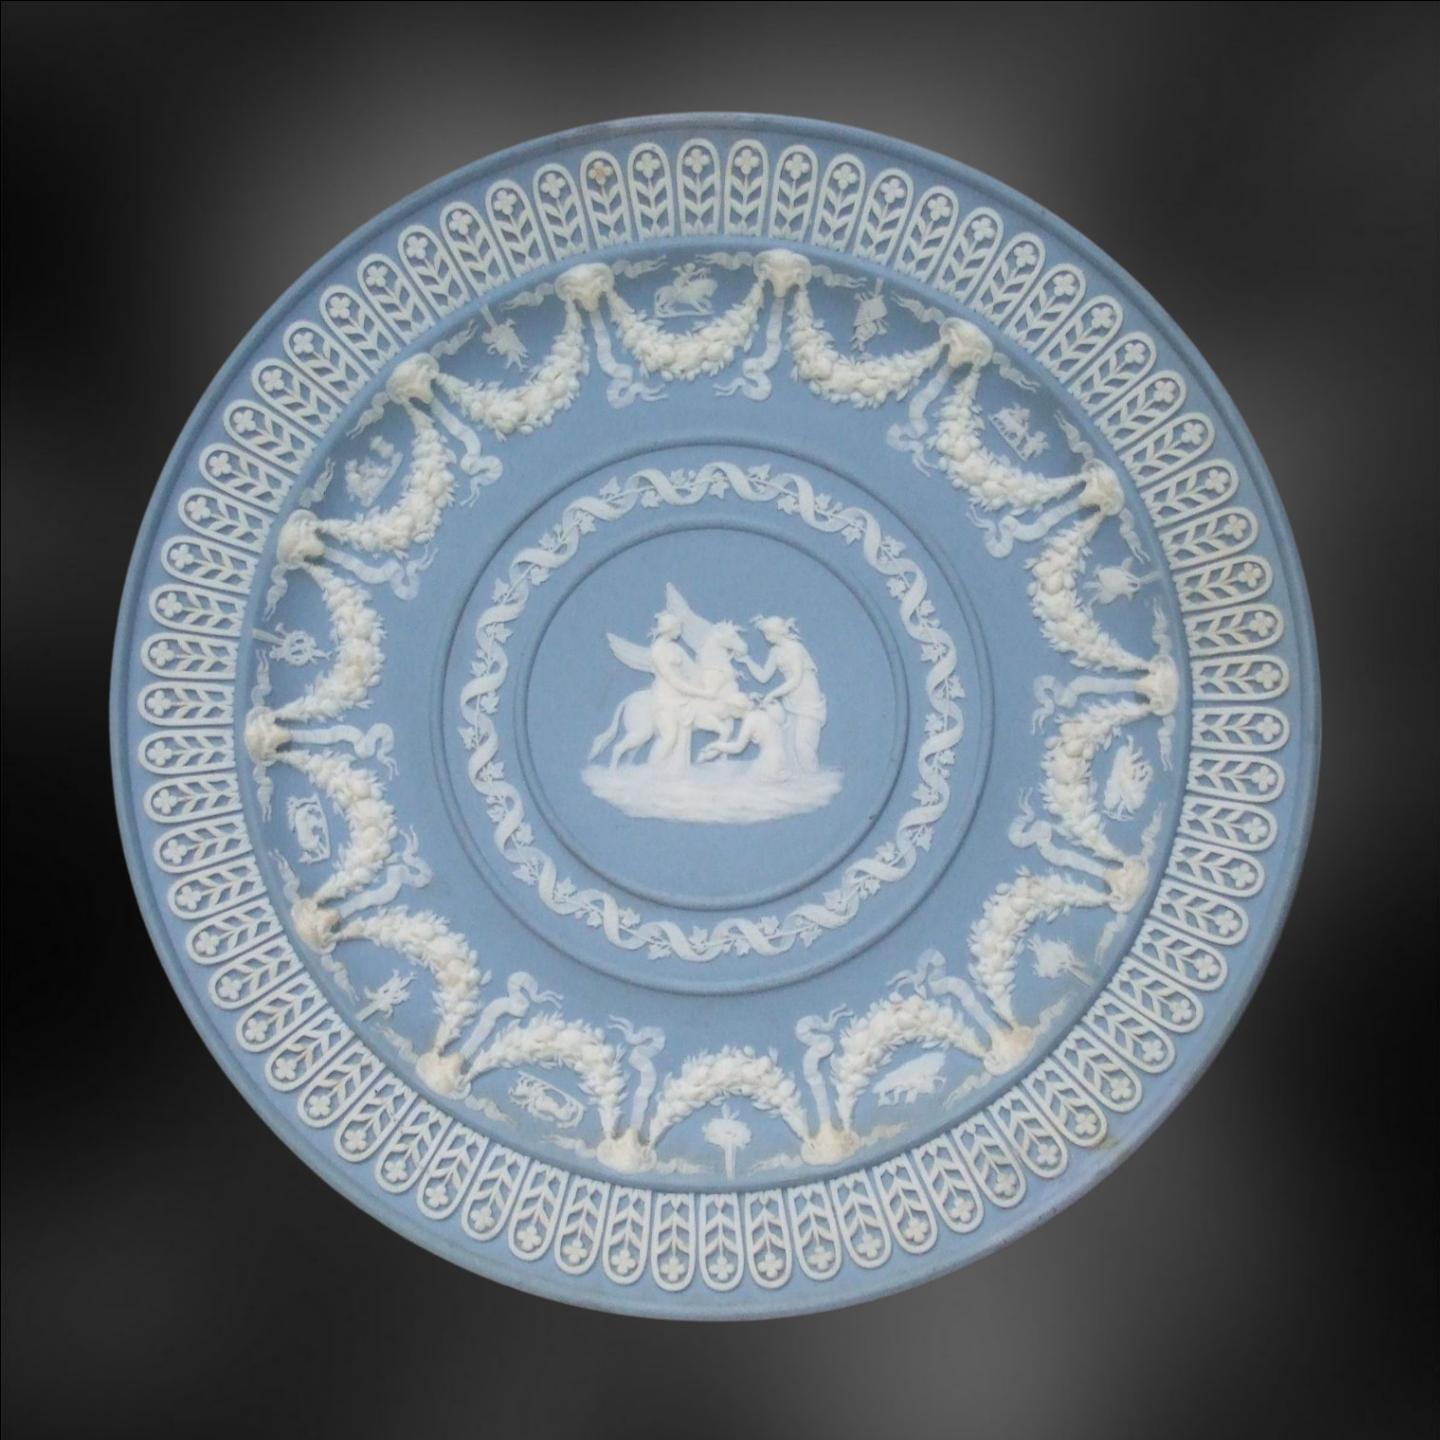 Trophy plates were a particularly Victorian development at Wedgwood, taking the use of classical ornament to its absolute limit. Over 2,000 individual sprigs were made, applied, and undercut to produce this plate. Only the best decorators made